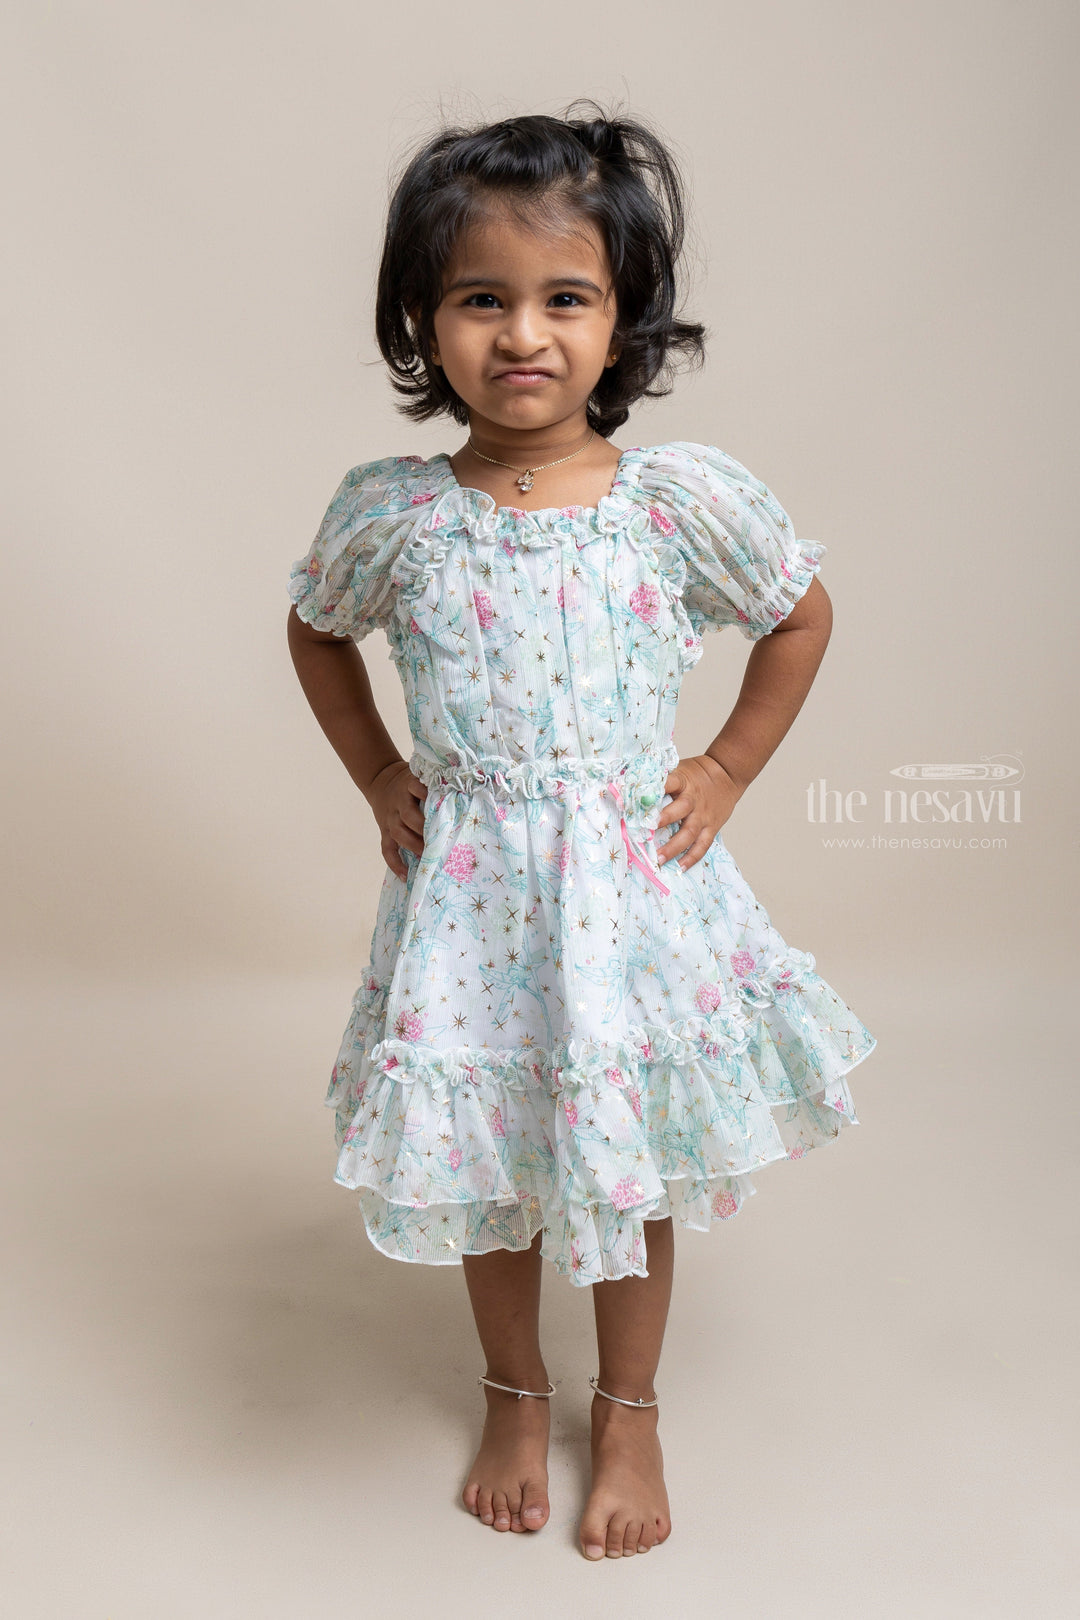 The Nesavu Baby Fancy Frock Eye-catching Green Floral Printed Ruffled Chiffon Frock for Baby girls Nesavu 14 (6M) / Green / Chiffon BFJ351A Floral Designed Baby Frock | New Arrivals For Baby girls | The Nesavu